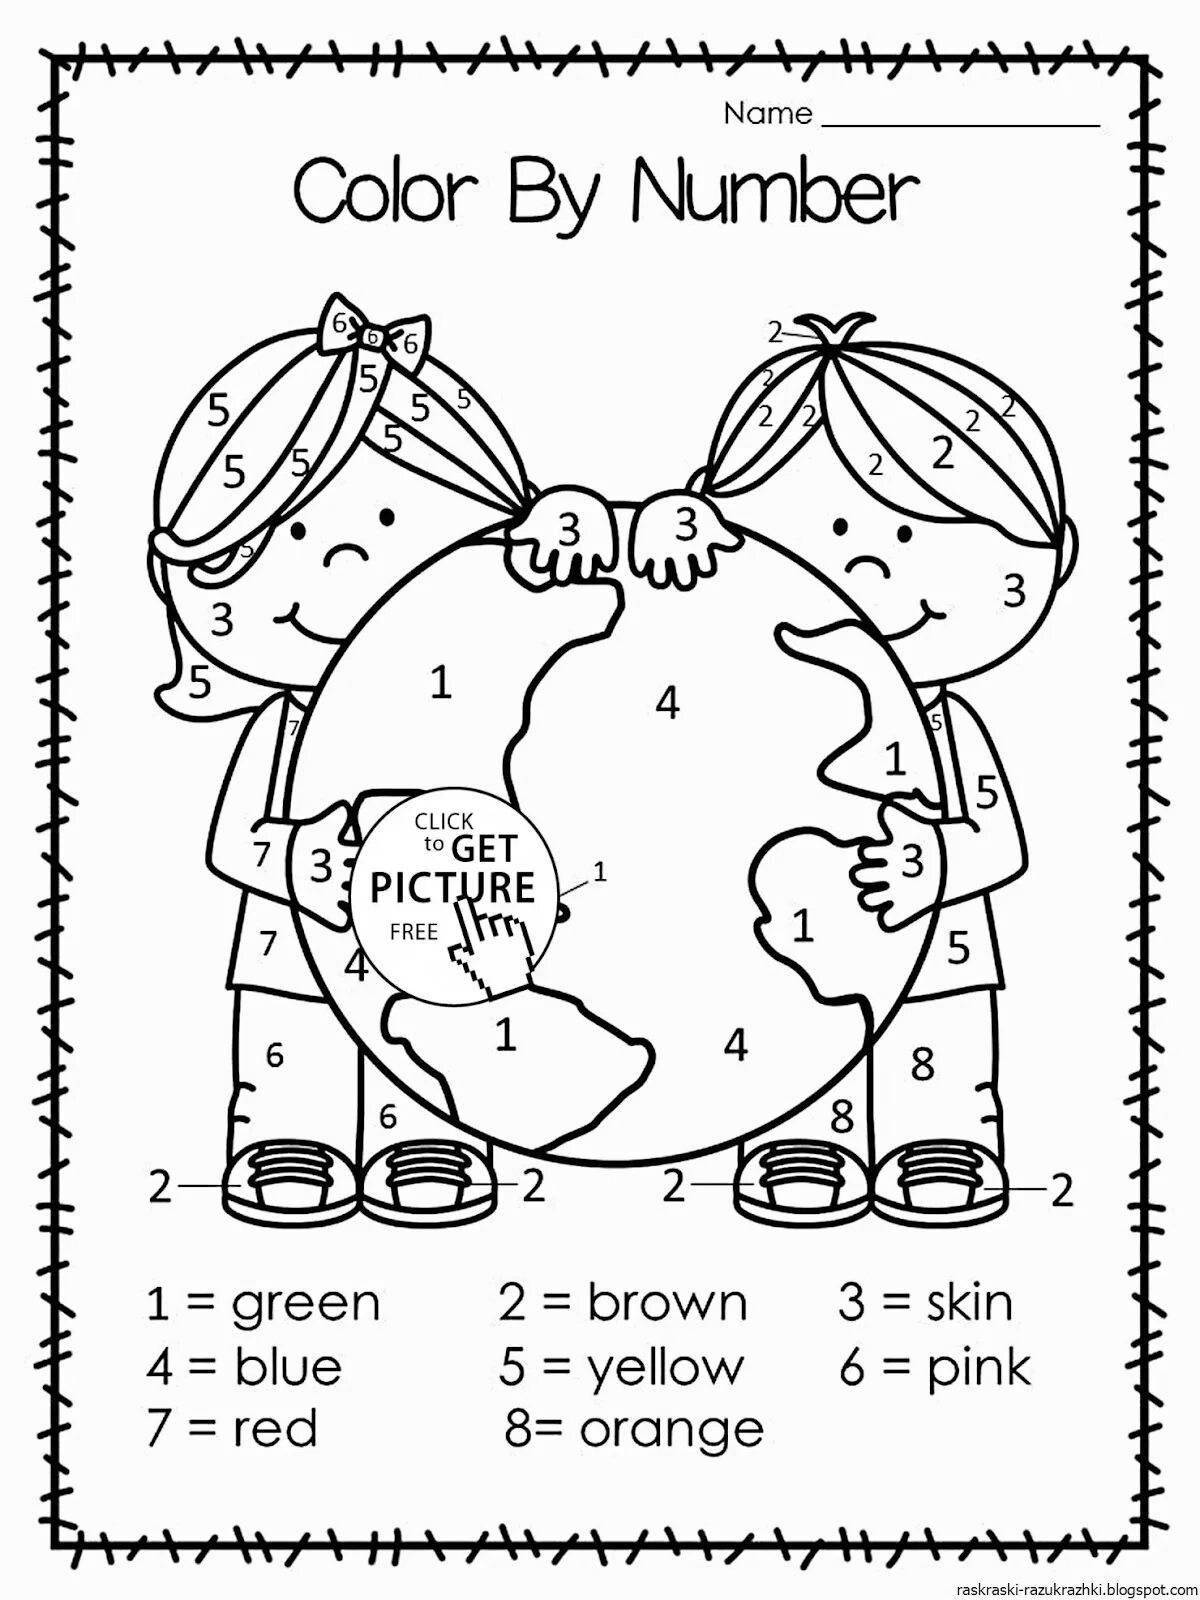 Pleasant coloring book in English for kids